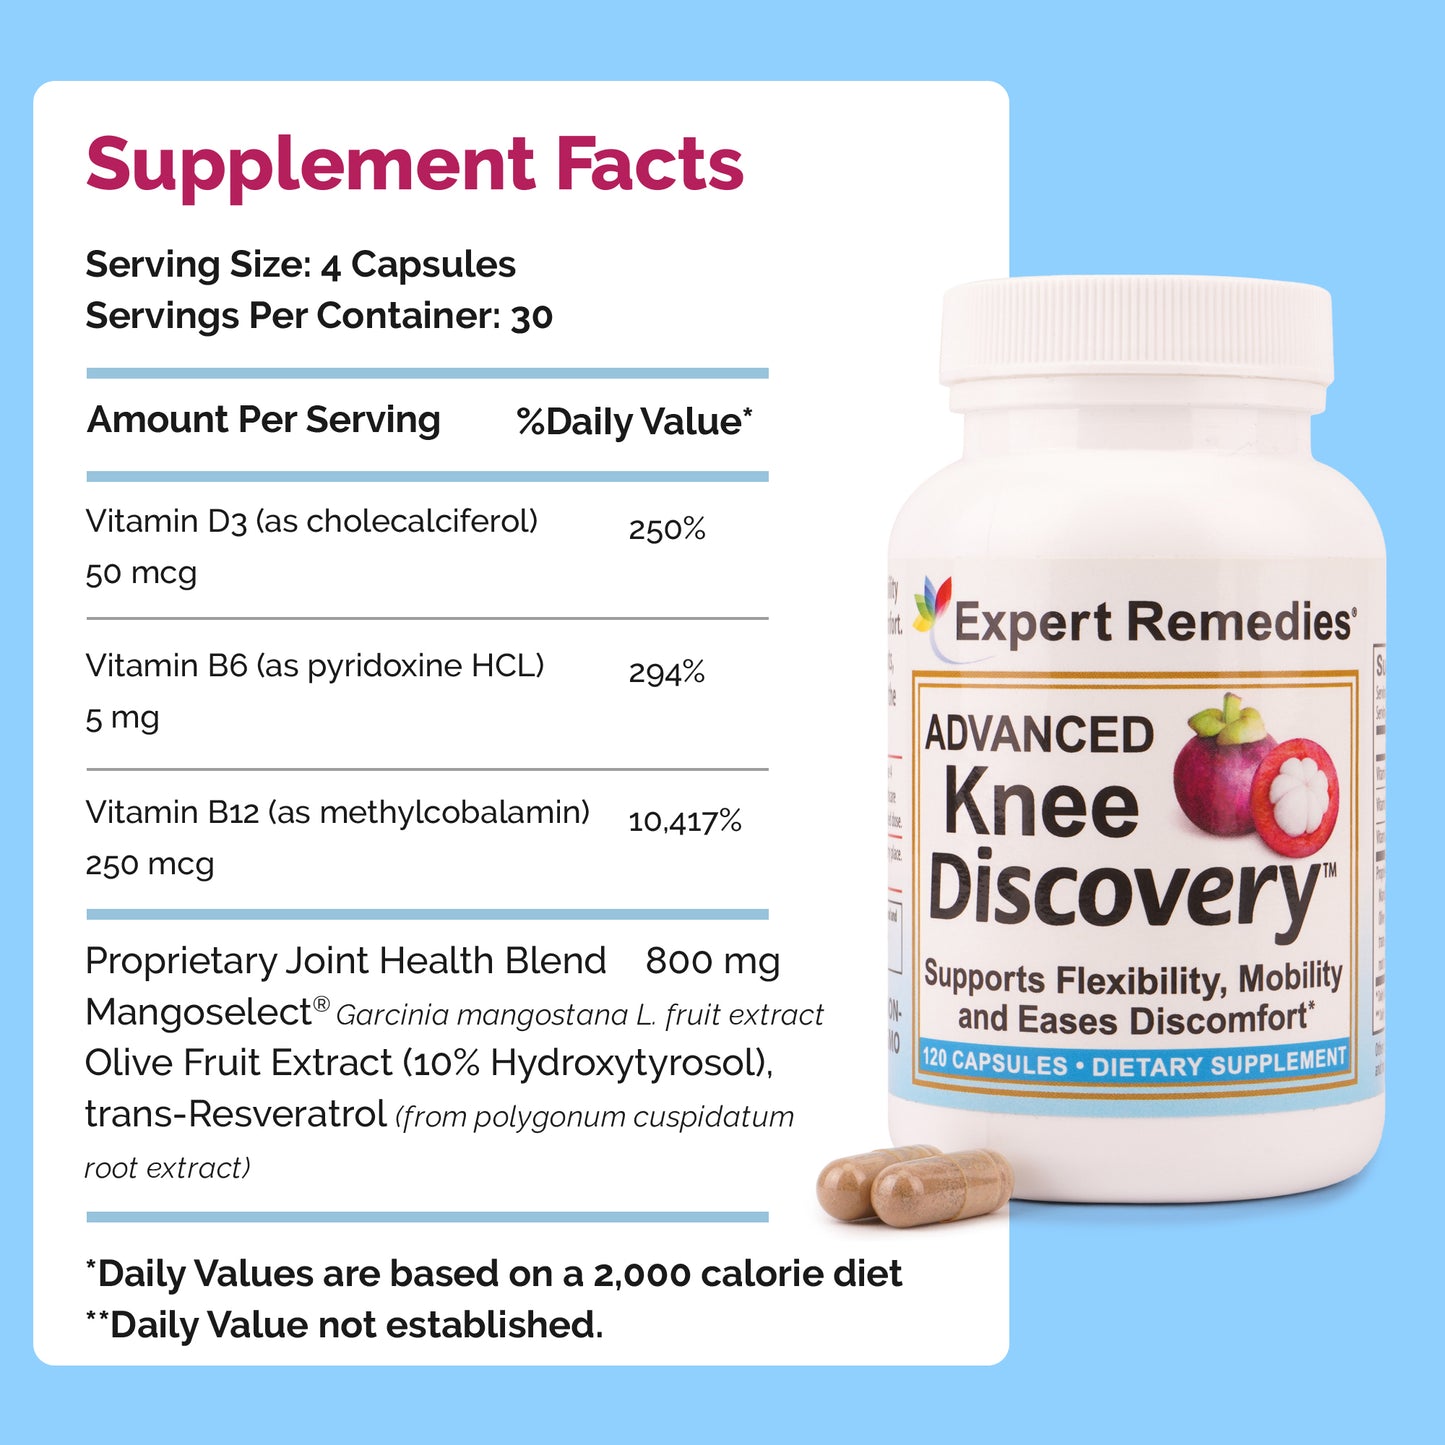 Expert Remedies Advanced Knee Discovery 120 Capsules